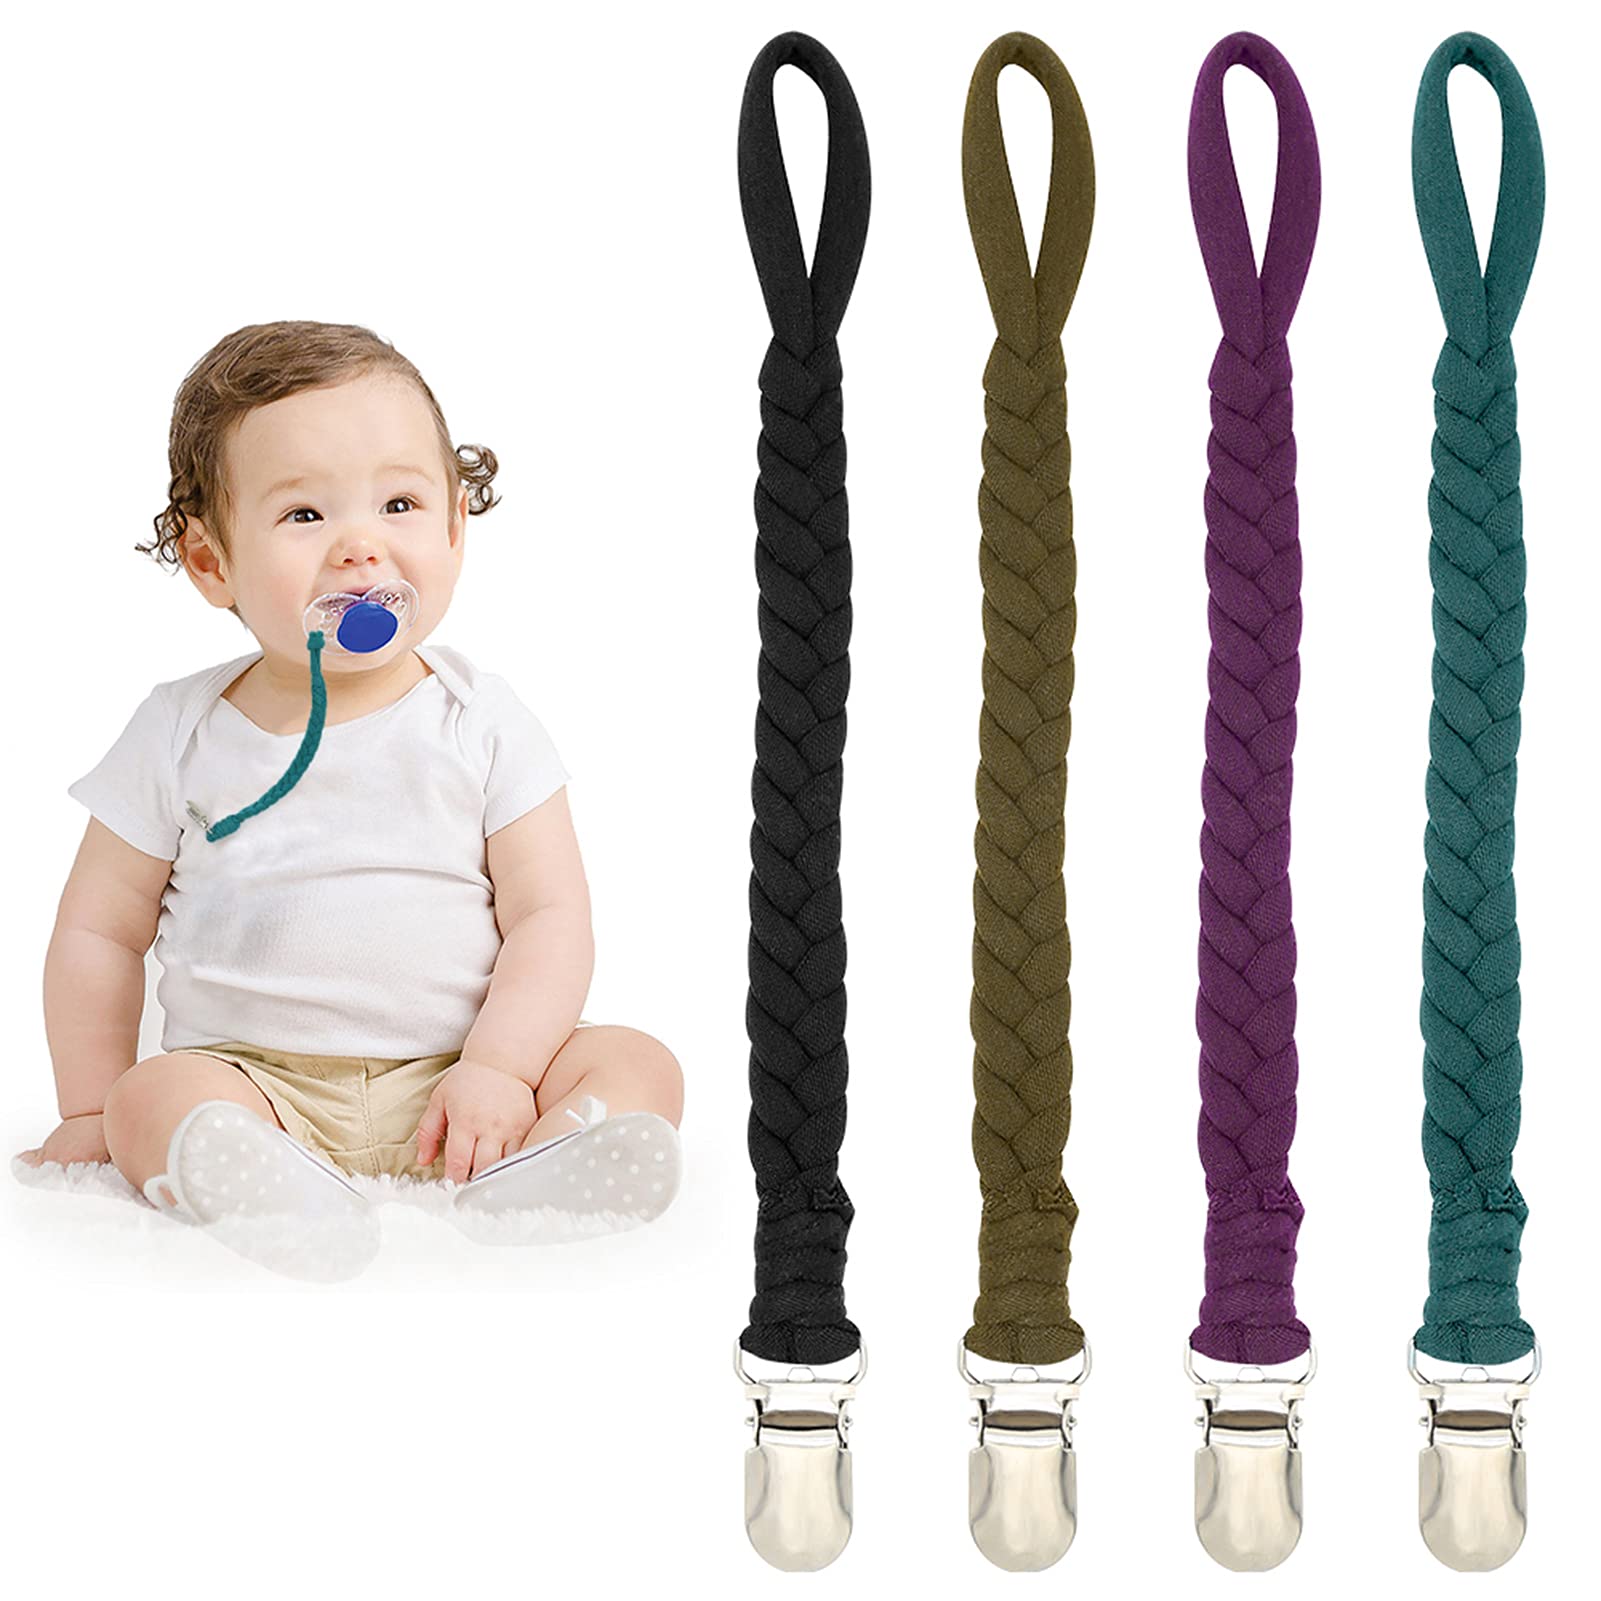 Handmade Braided Cotton Baby Binky Clips Pacifier Strap Lanyard Chain (6  Pack)